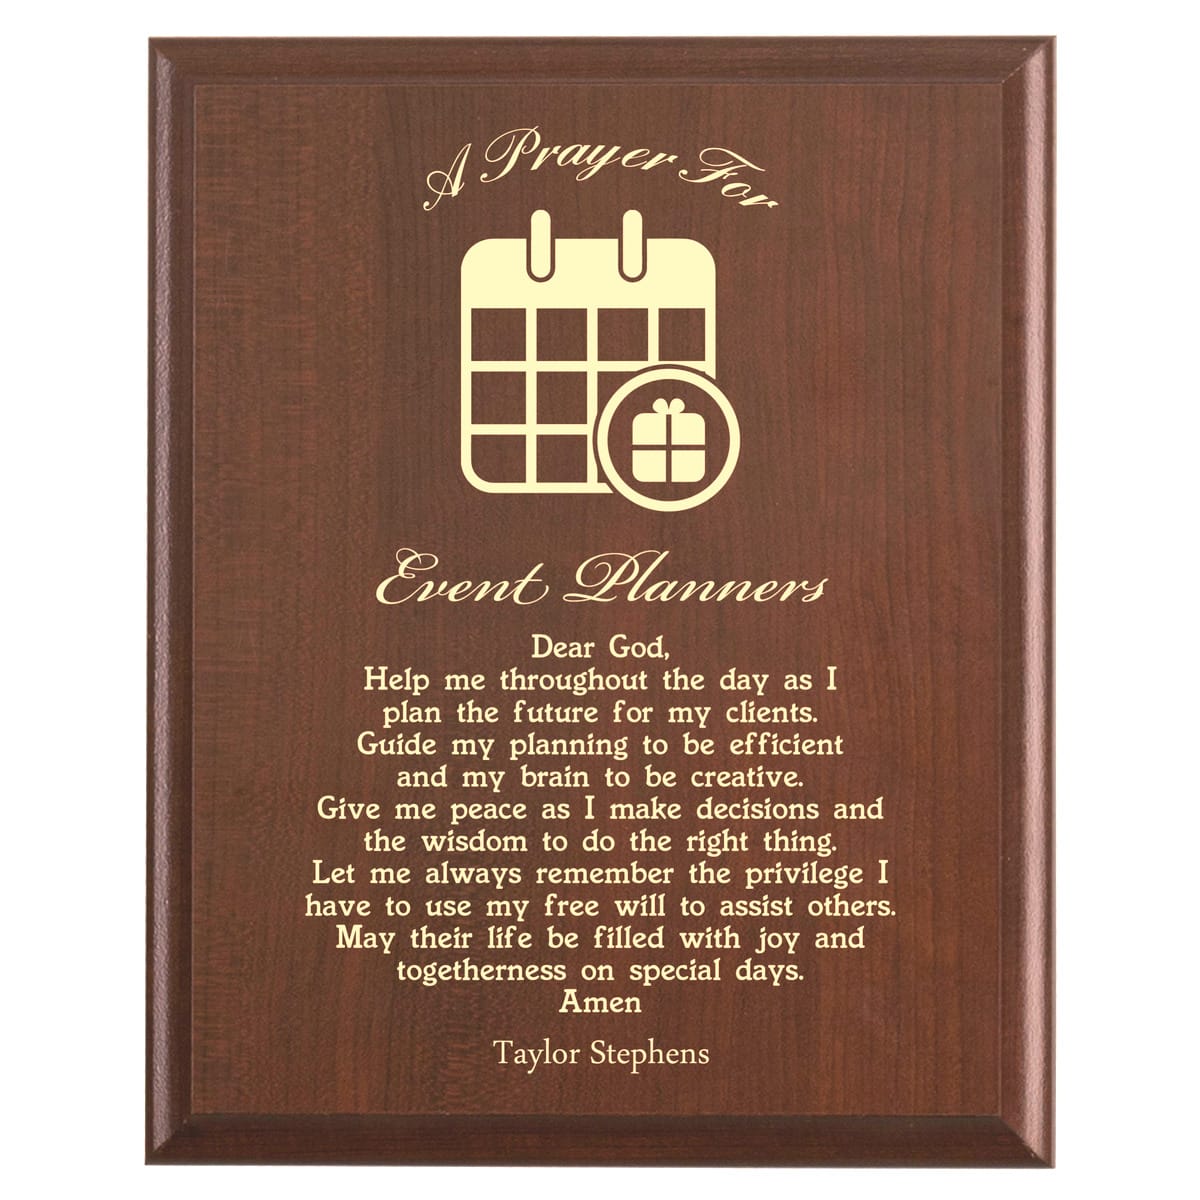 Plaque photo: Event Planners Prayer Plaque design with free personalization. Wood style finish with customized text.